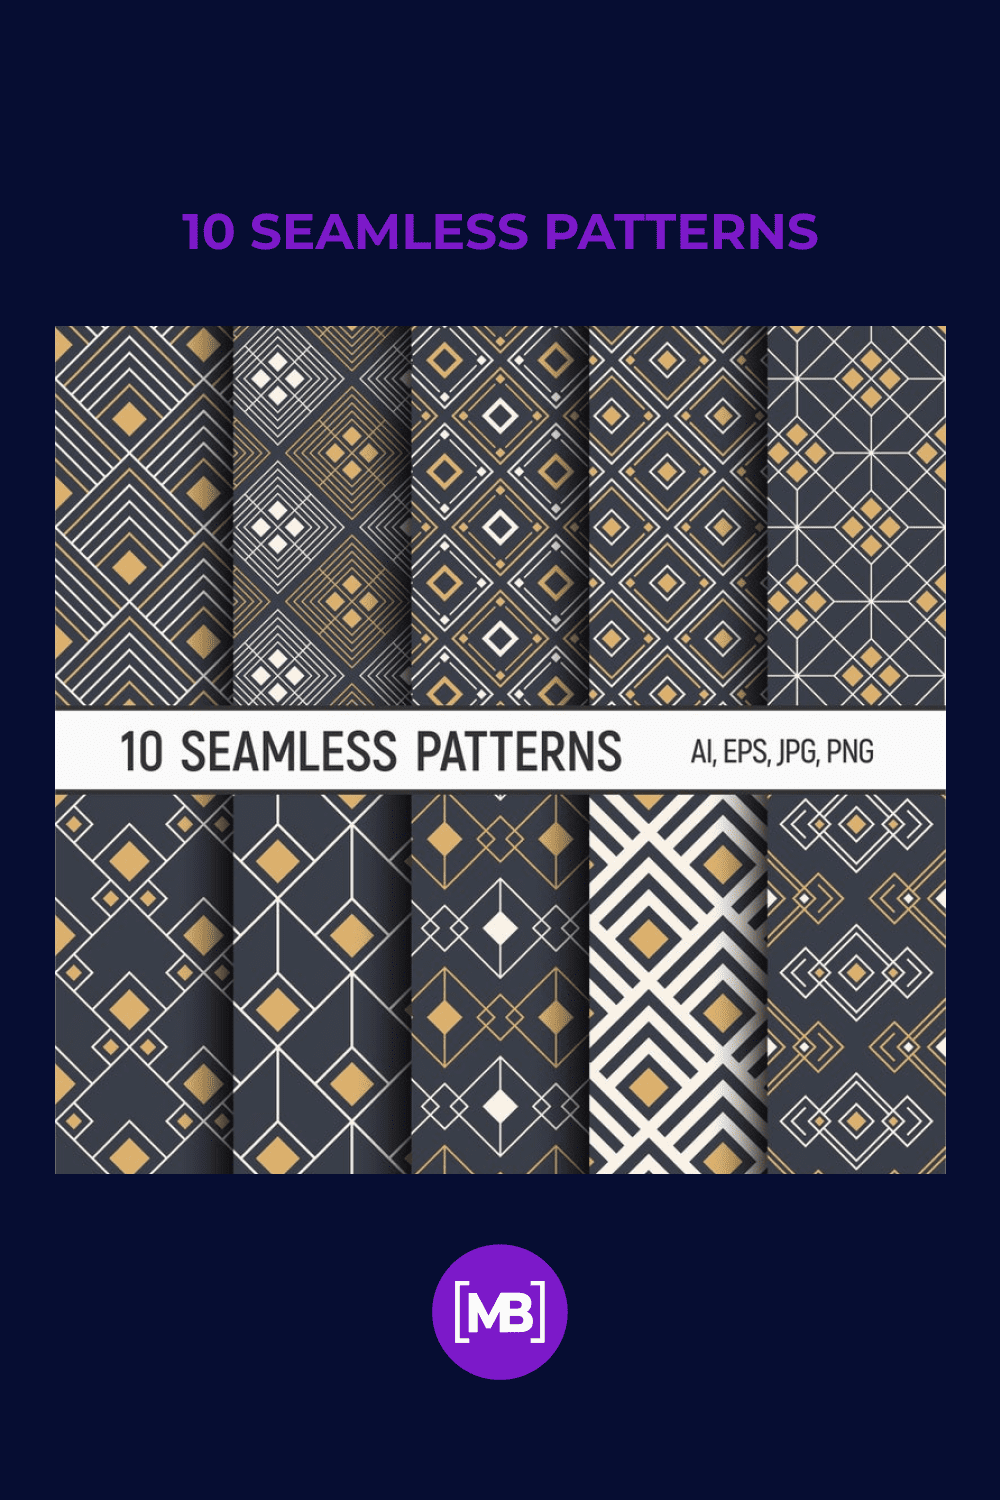 Luxury rhombus patterns in black and gold colors.